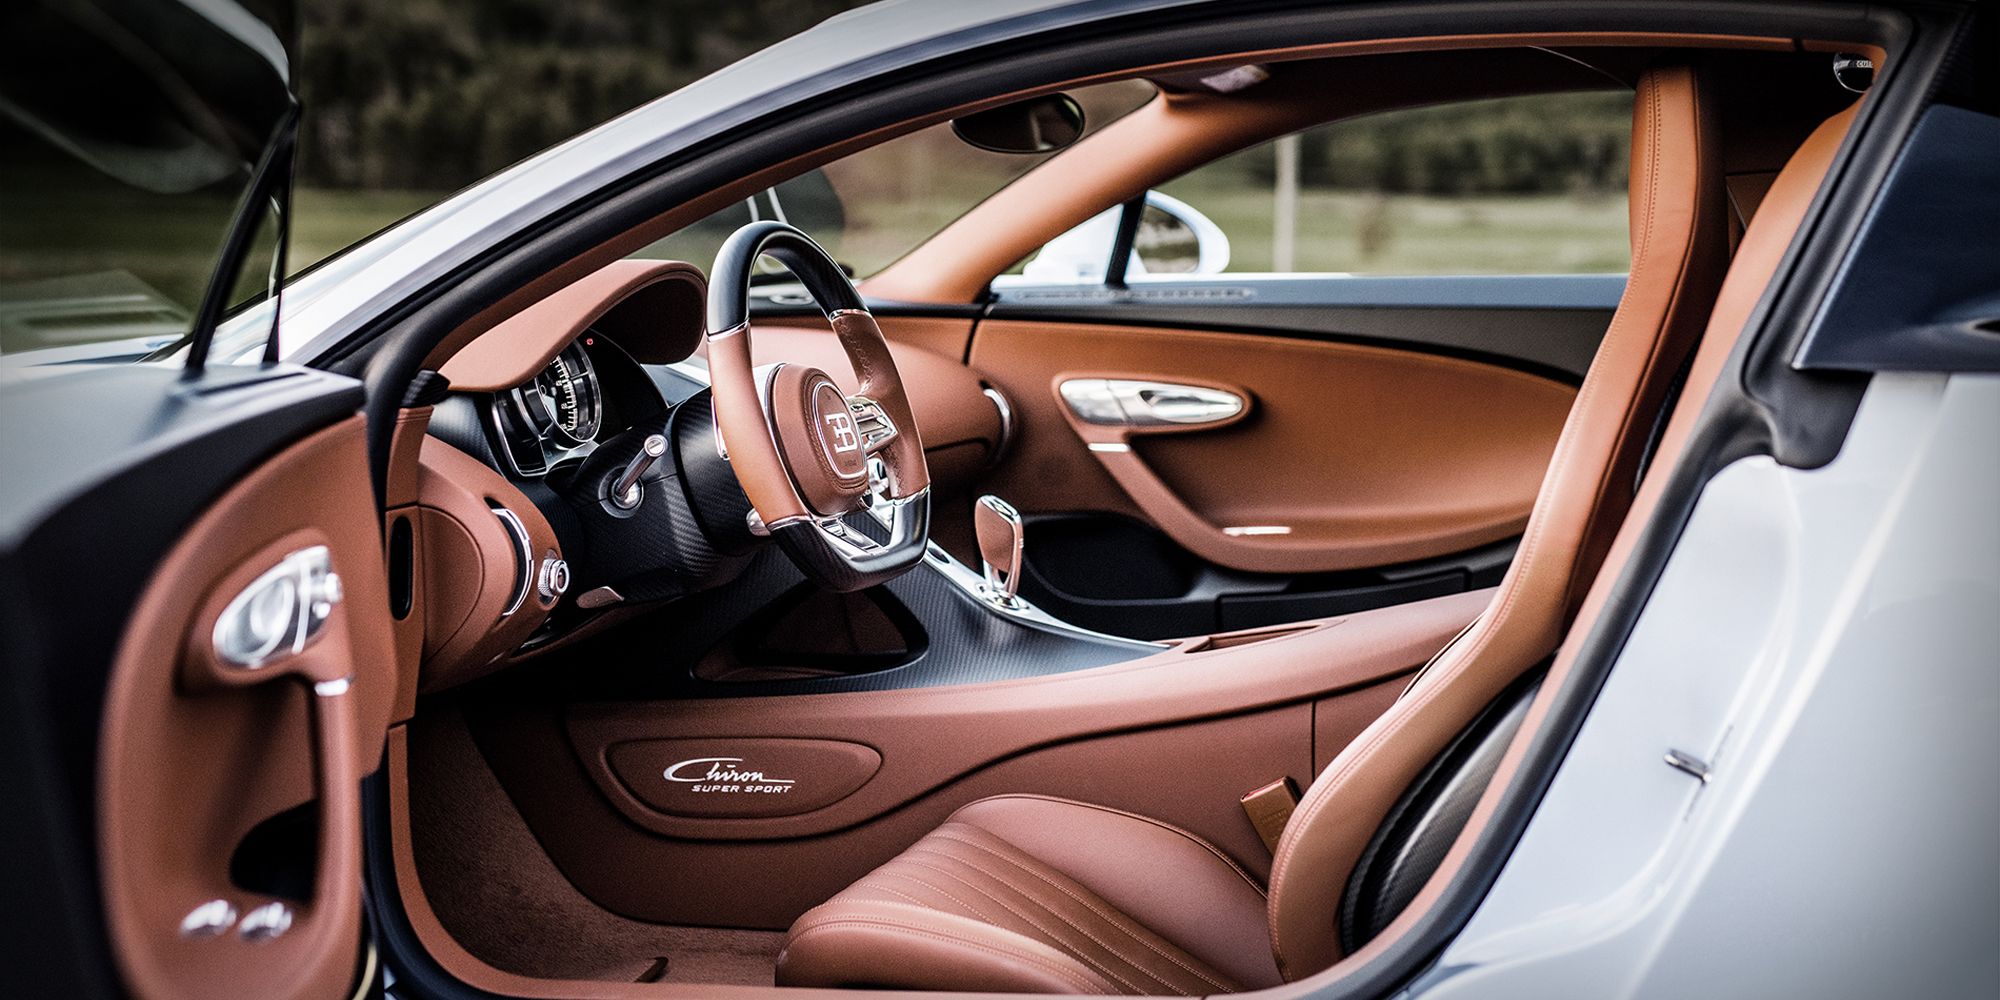 The interior of the Chiron Super Sport